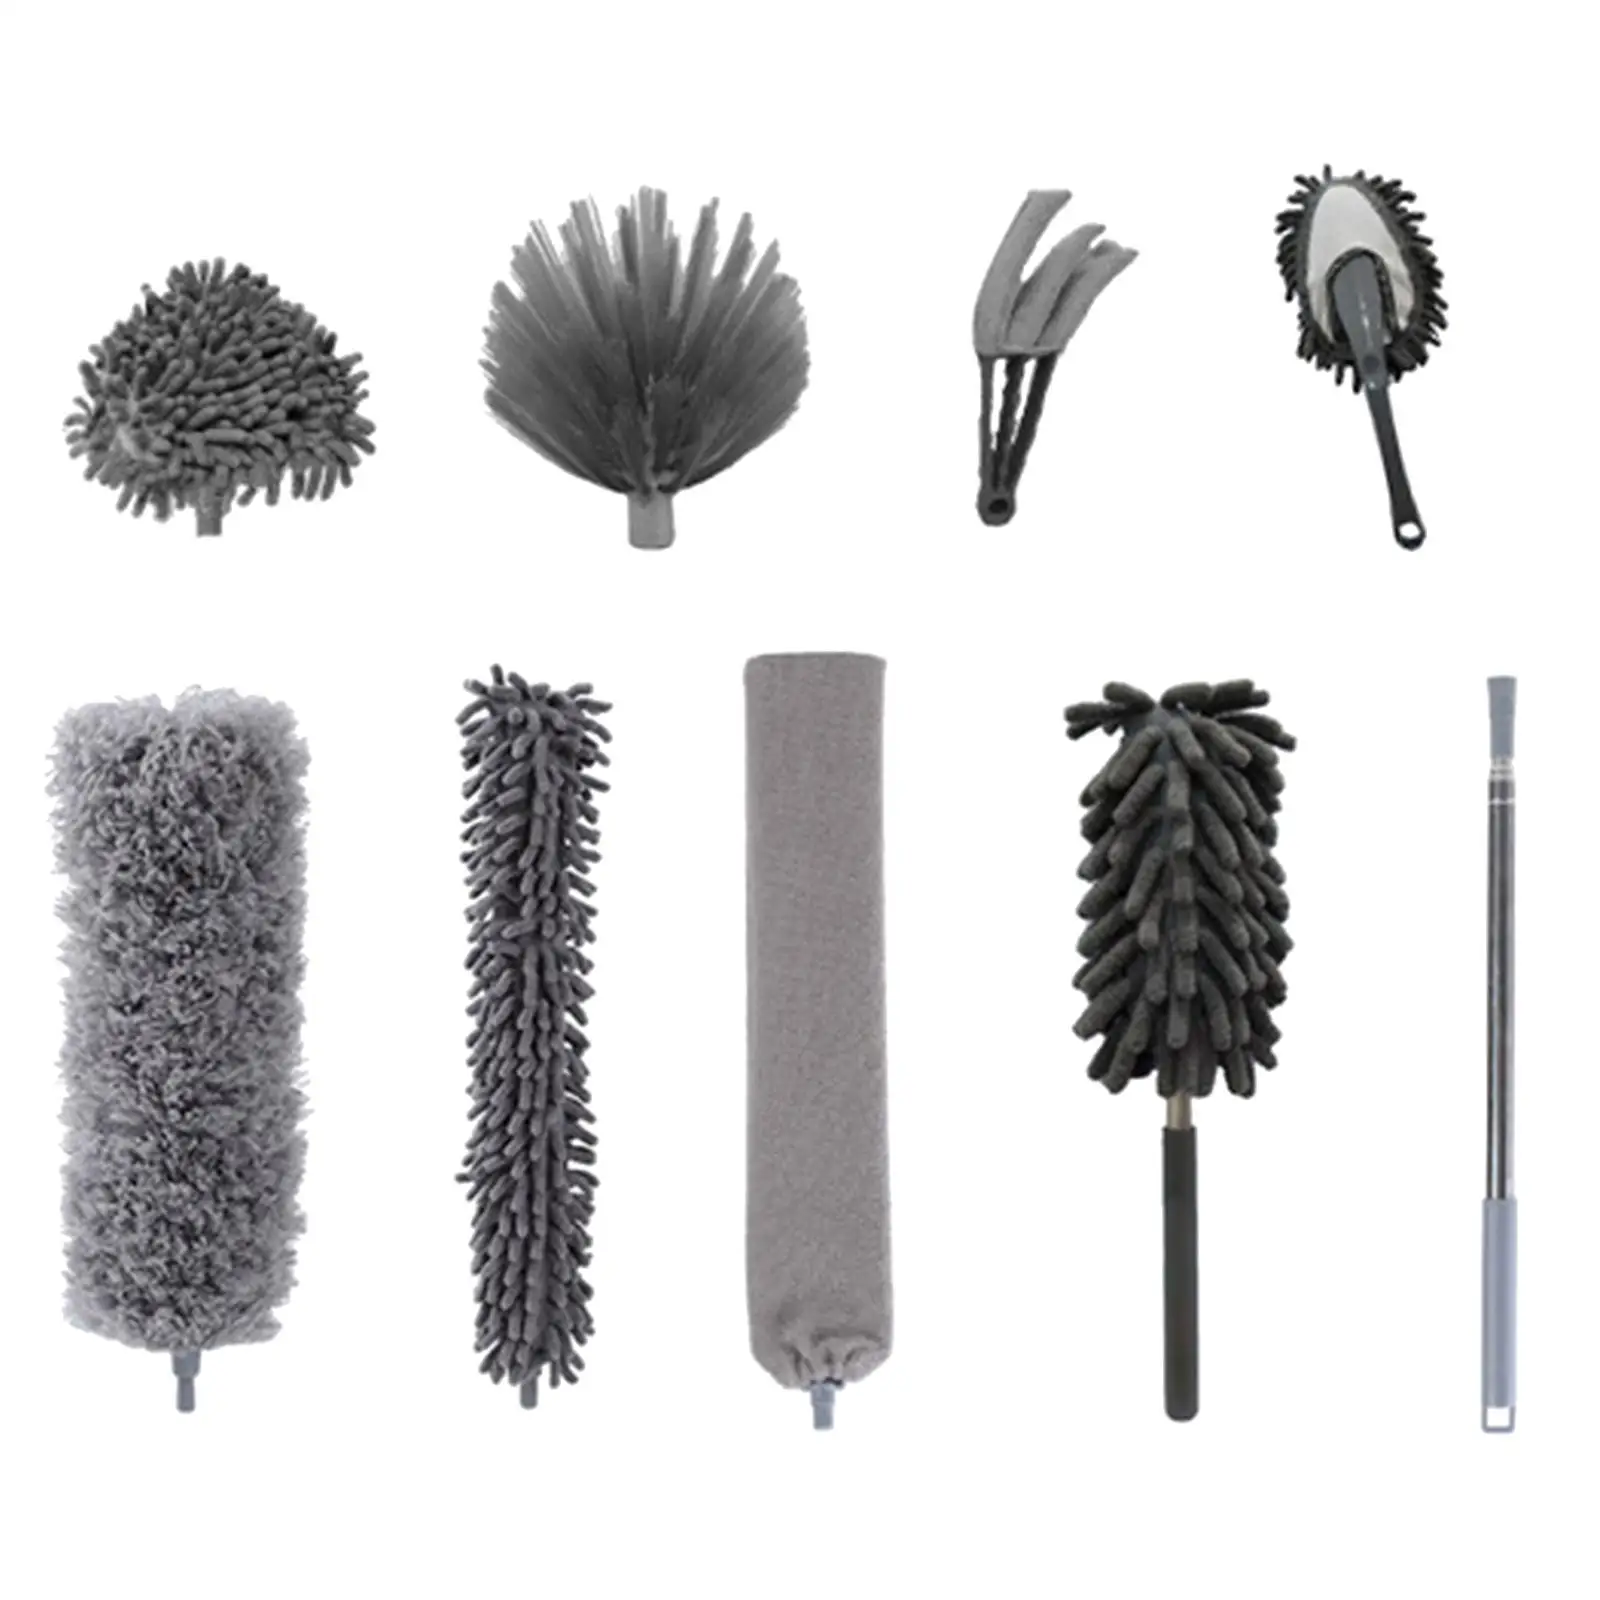 Fiber Cleaning Brush Clearance Detachable Cleaning Tool for Keyboard Office Bedroom